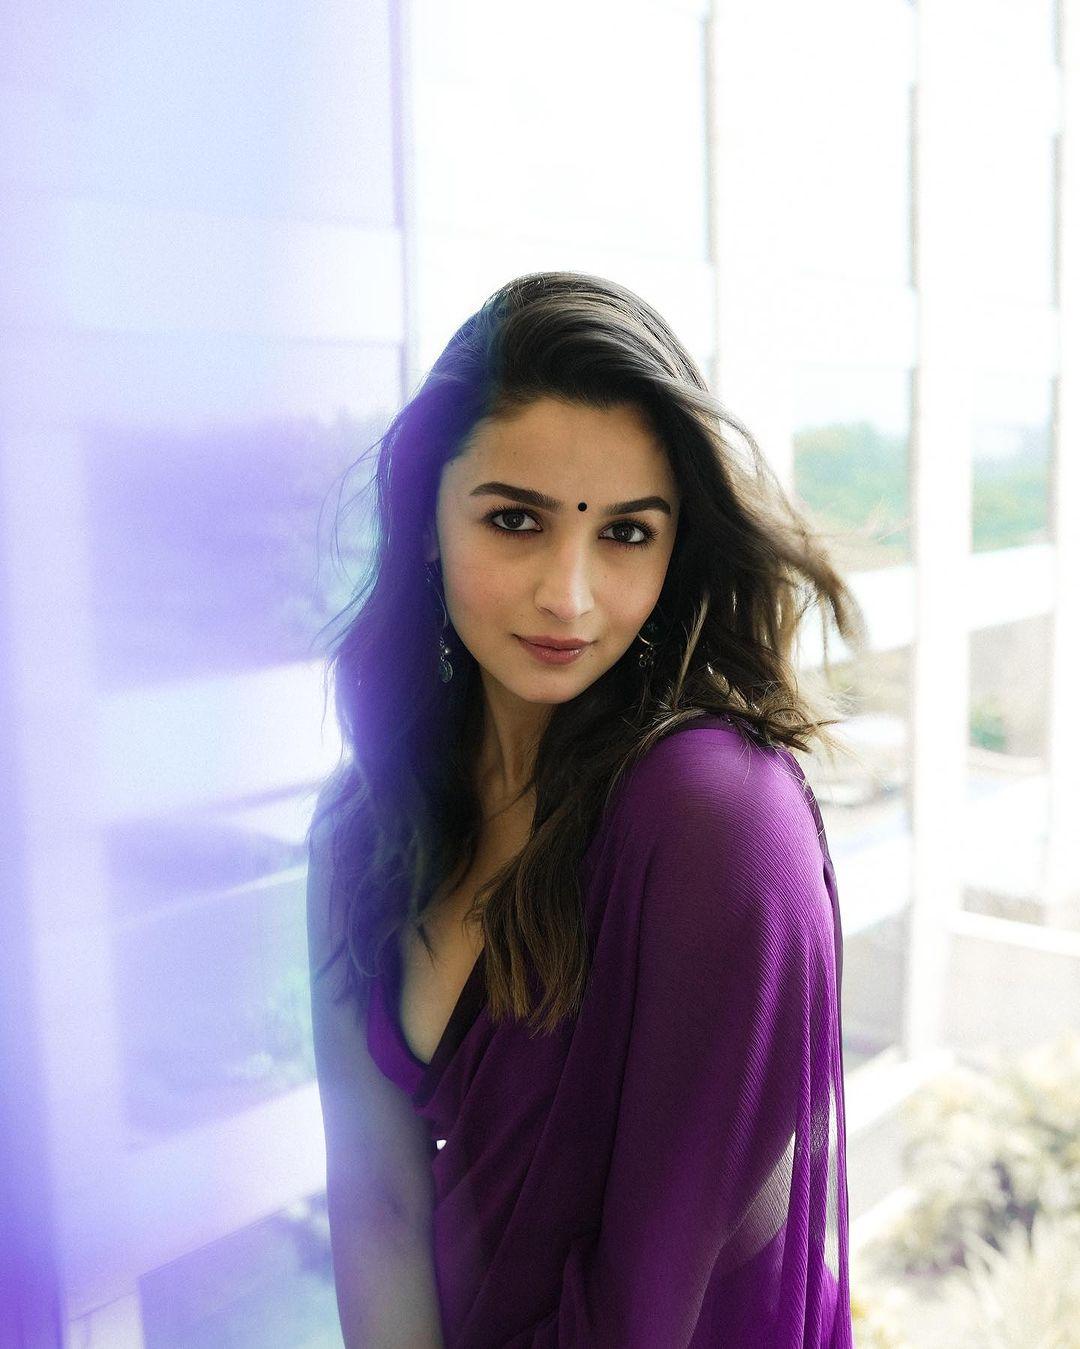 A vision in violet! Alia Bhatt's purple saree look steals the spotlight at the promotional event.